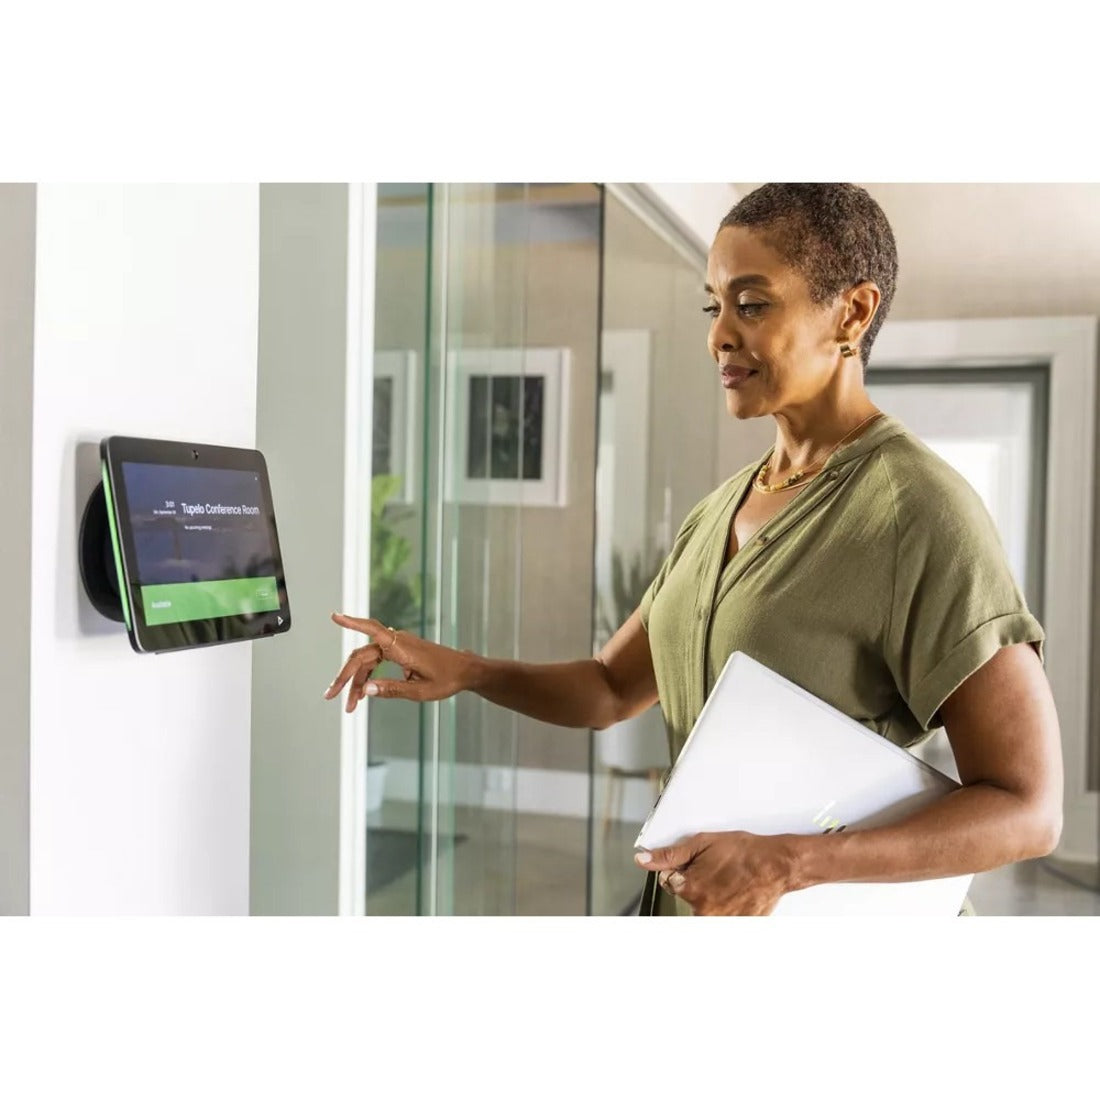 Poly 2200-37860-001 TC10 Video Conference Equipment, Multi-touch Screen, Kensington Lock